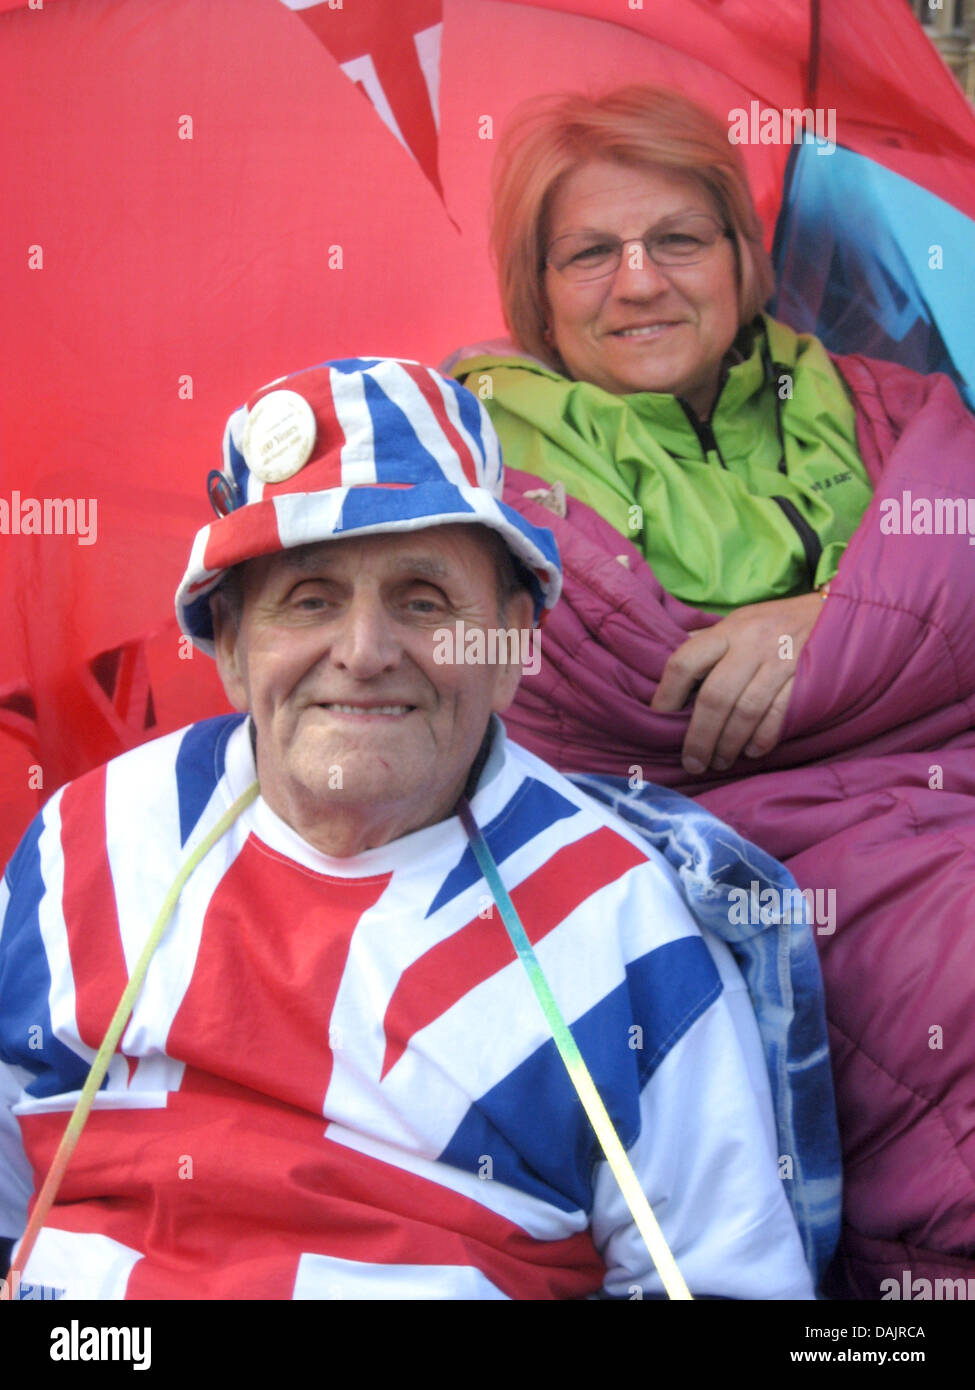 Terry Hutt (L) and Jennifer Hawkins sit in their tent in front of Westminster Abbey waiting for the upcoming royal wedding in London, Great Britain, 27 April 2011. Prince William and his bride to be Kate Middleton will get married at Westminster Abbey on 29 April. Photo: Thomas Pfaffe Stock Photo